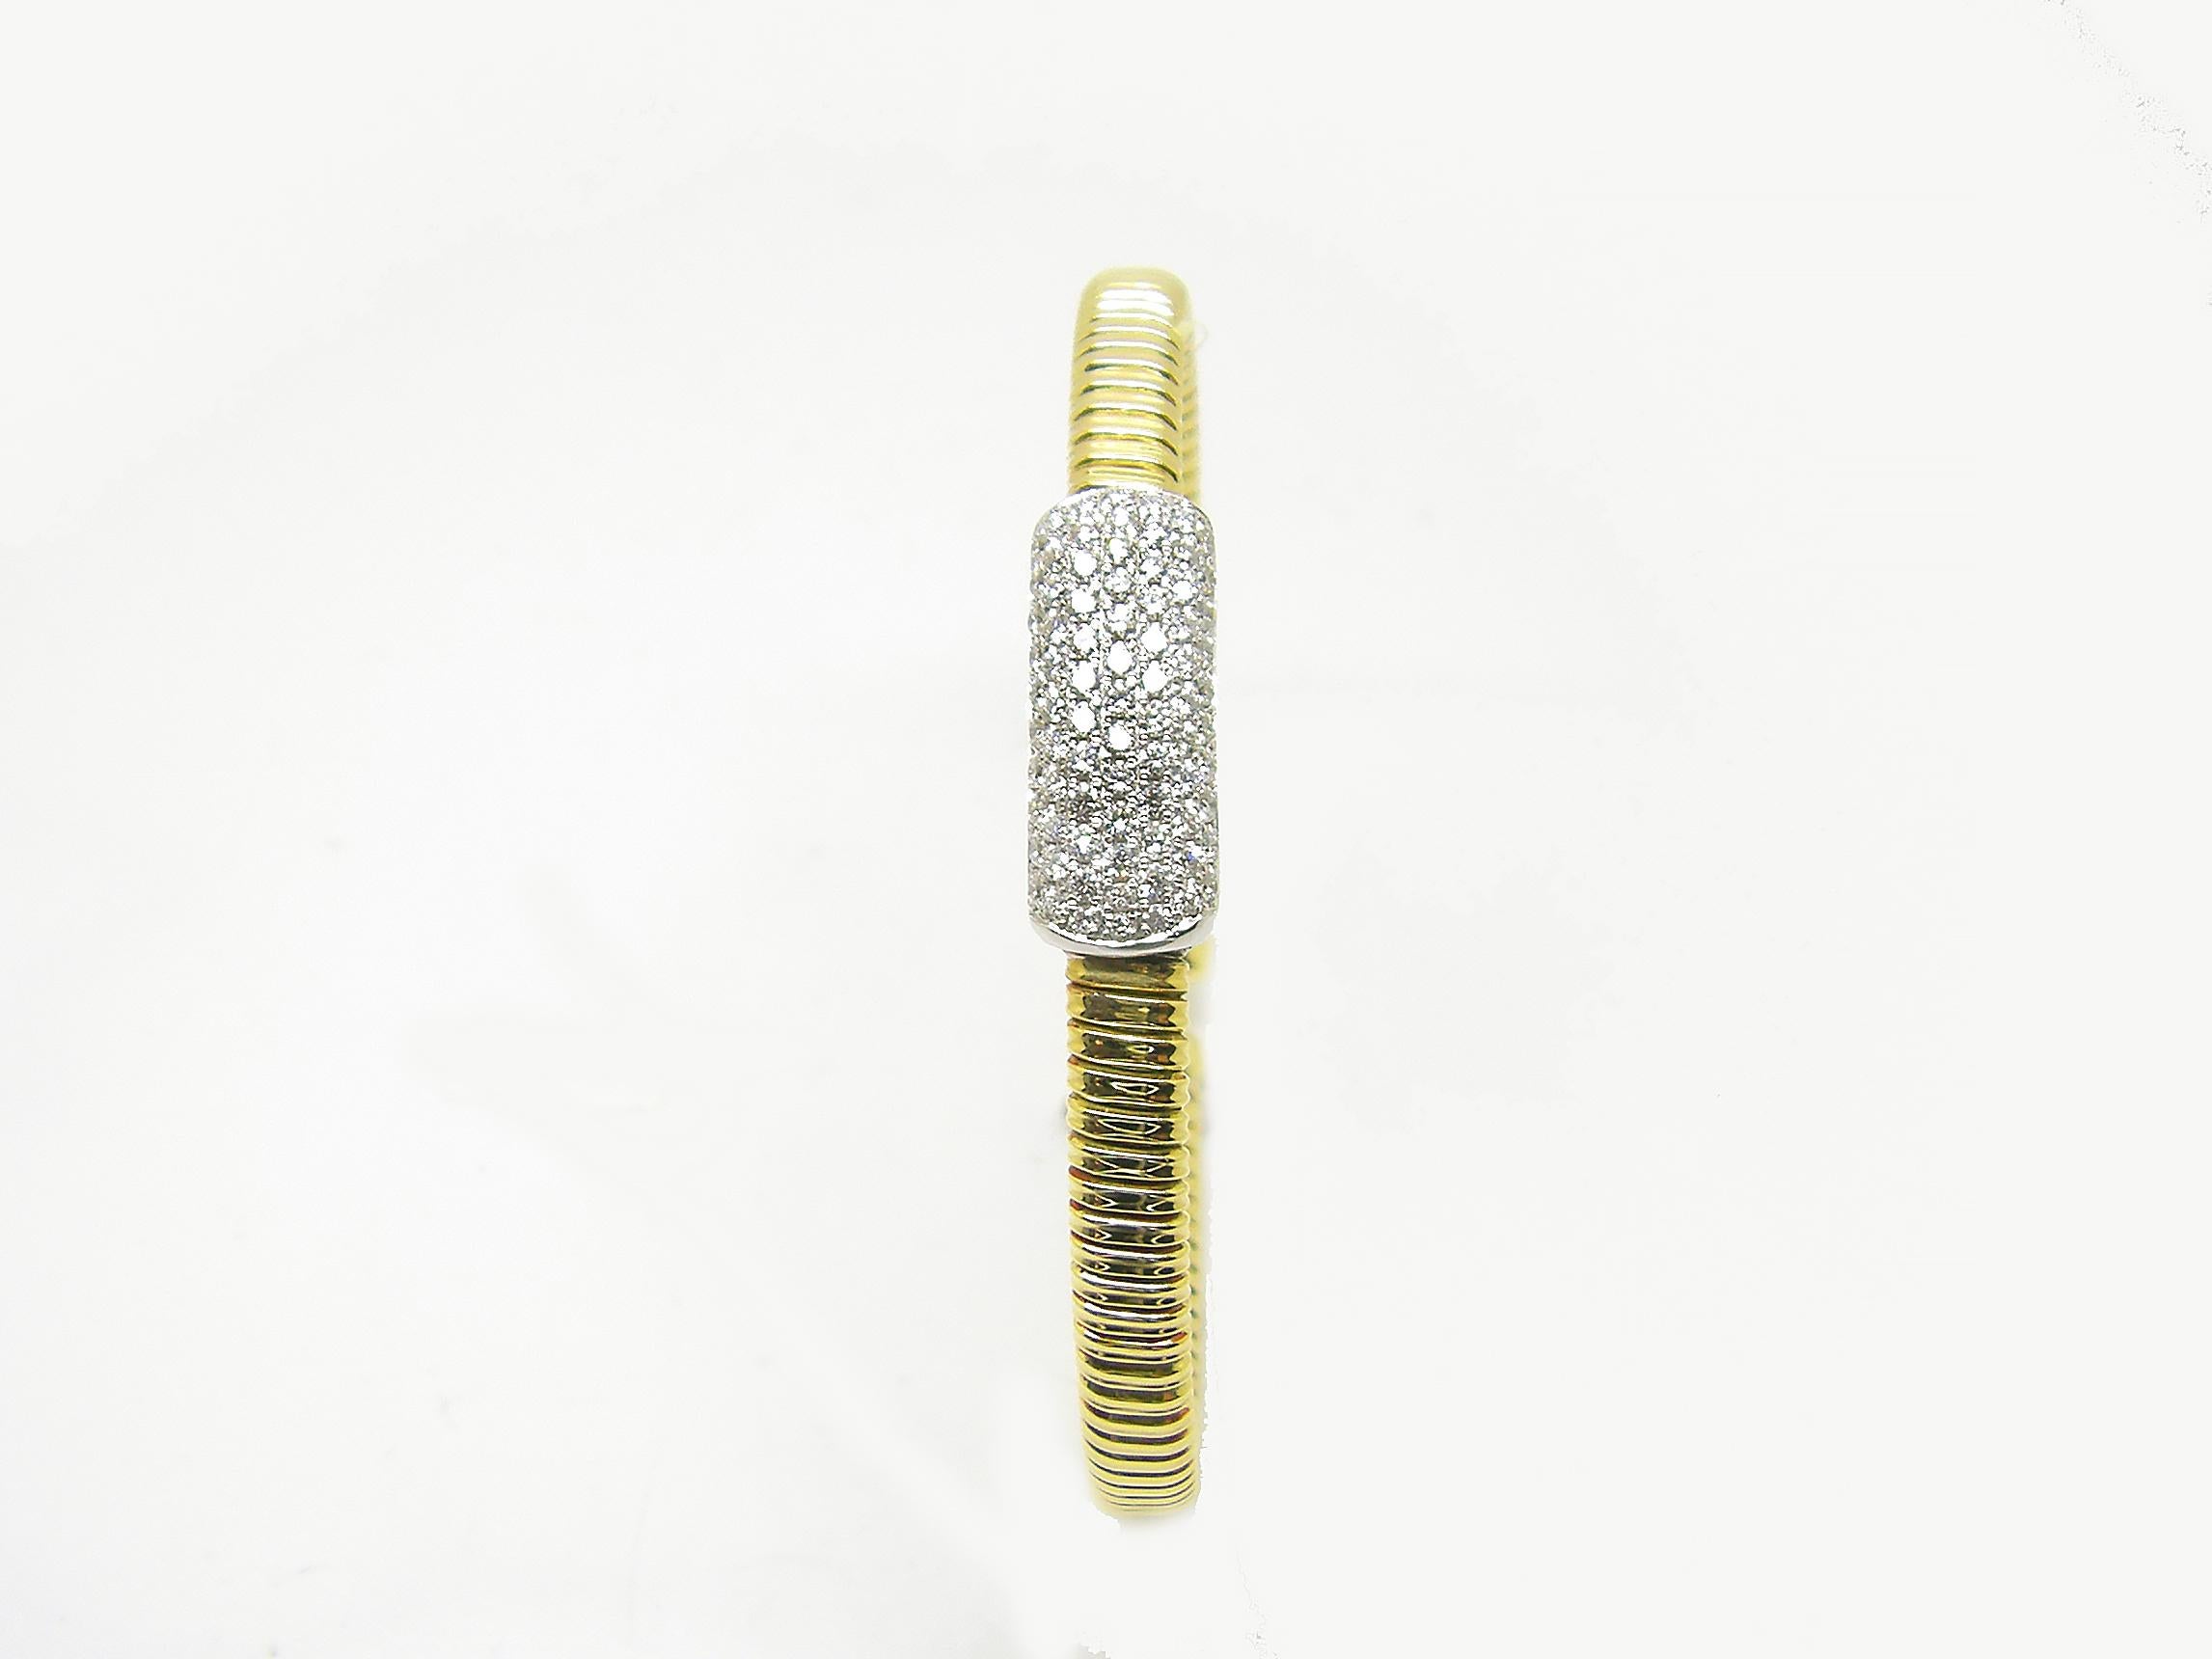 S.Georgios designer thin bangle cuff bracelet is custom made of Yellow and White gold 18 karats. The gorgeous cuff has brilliant cut white diamonds total weight of 0.80 Carat set microscopically on a white gold bar and is all made with twisted wires